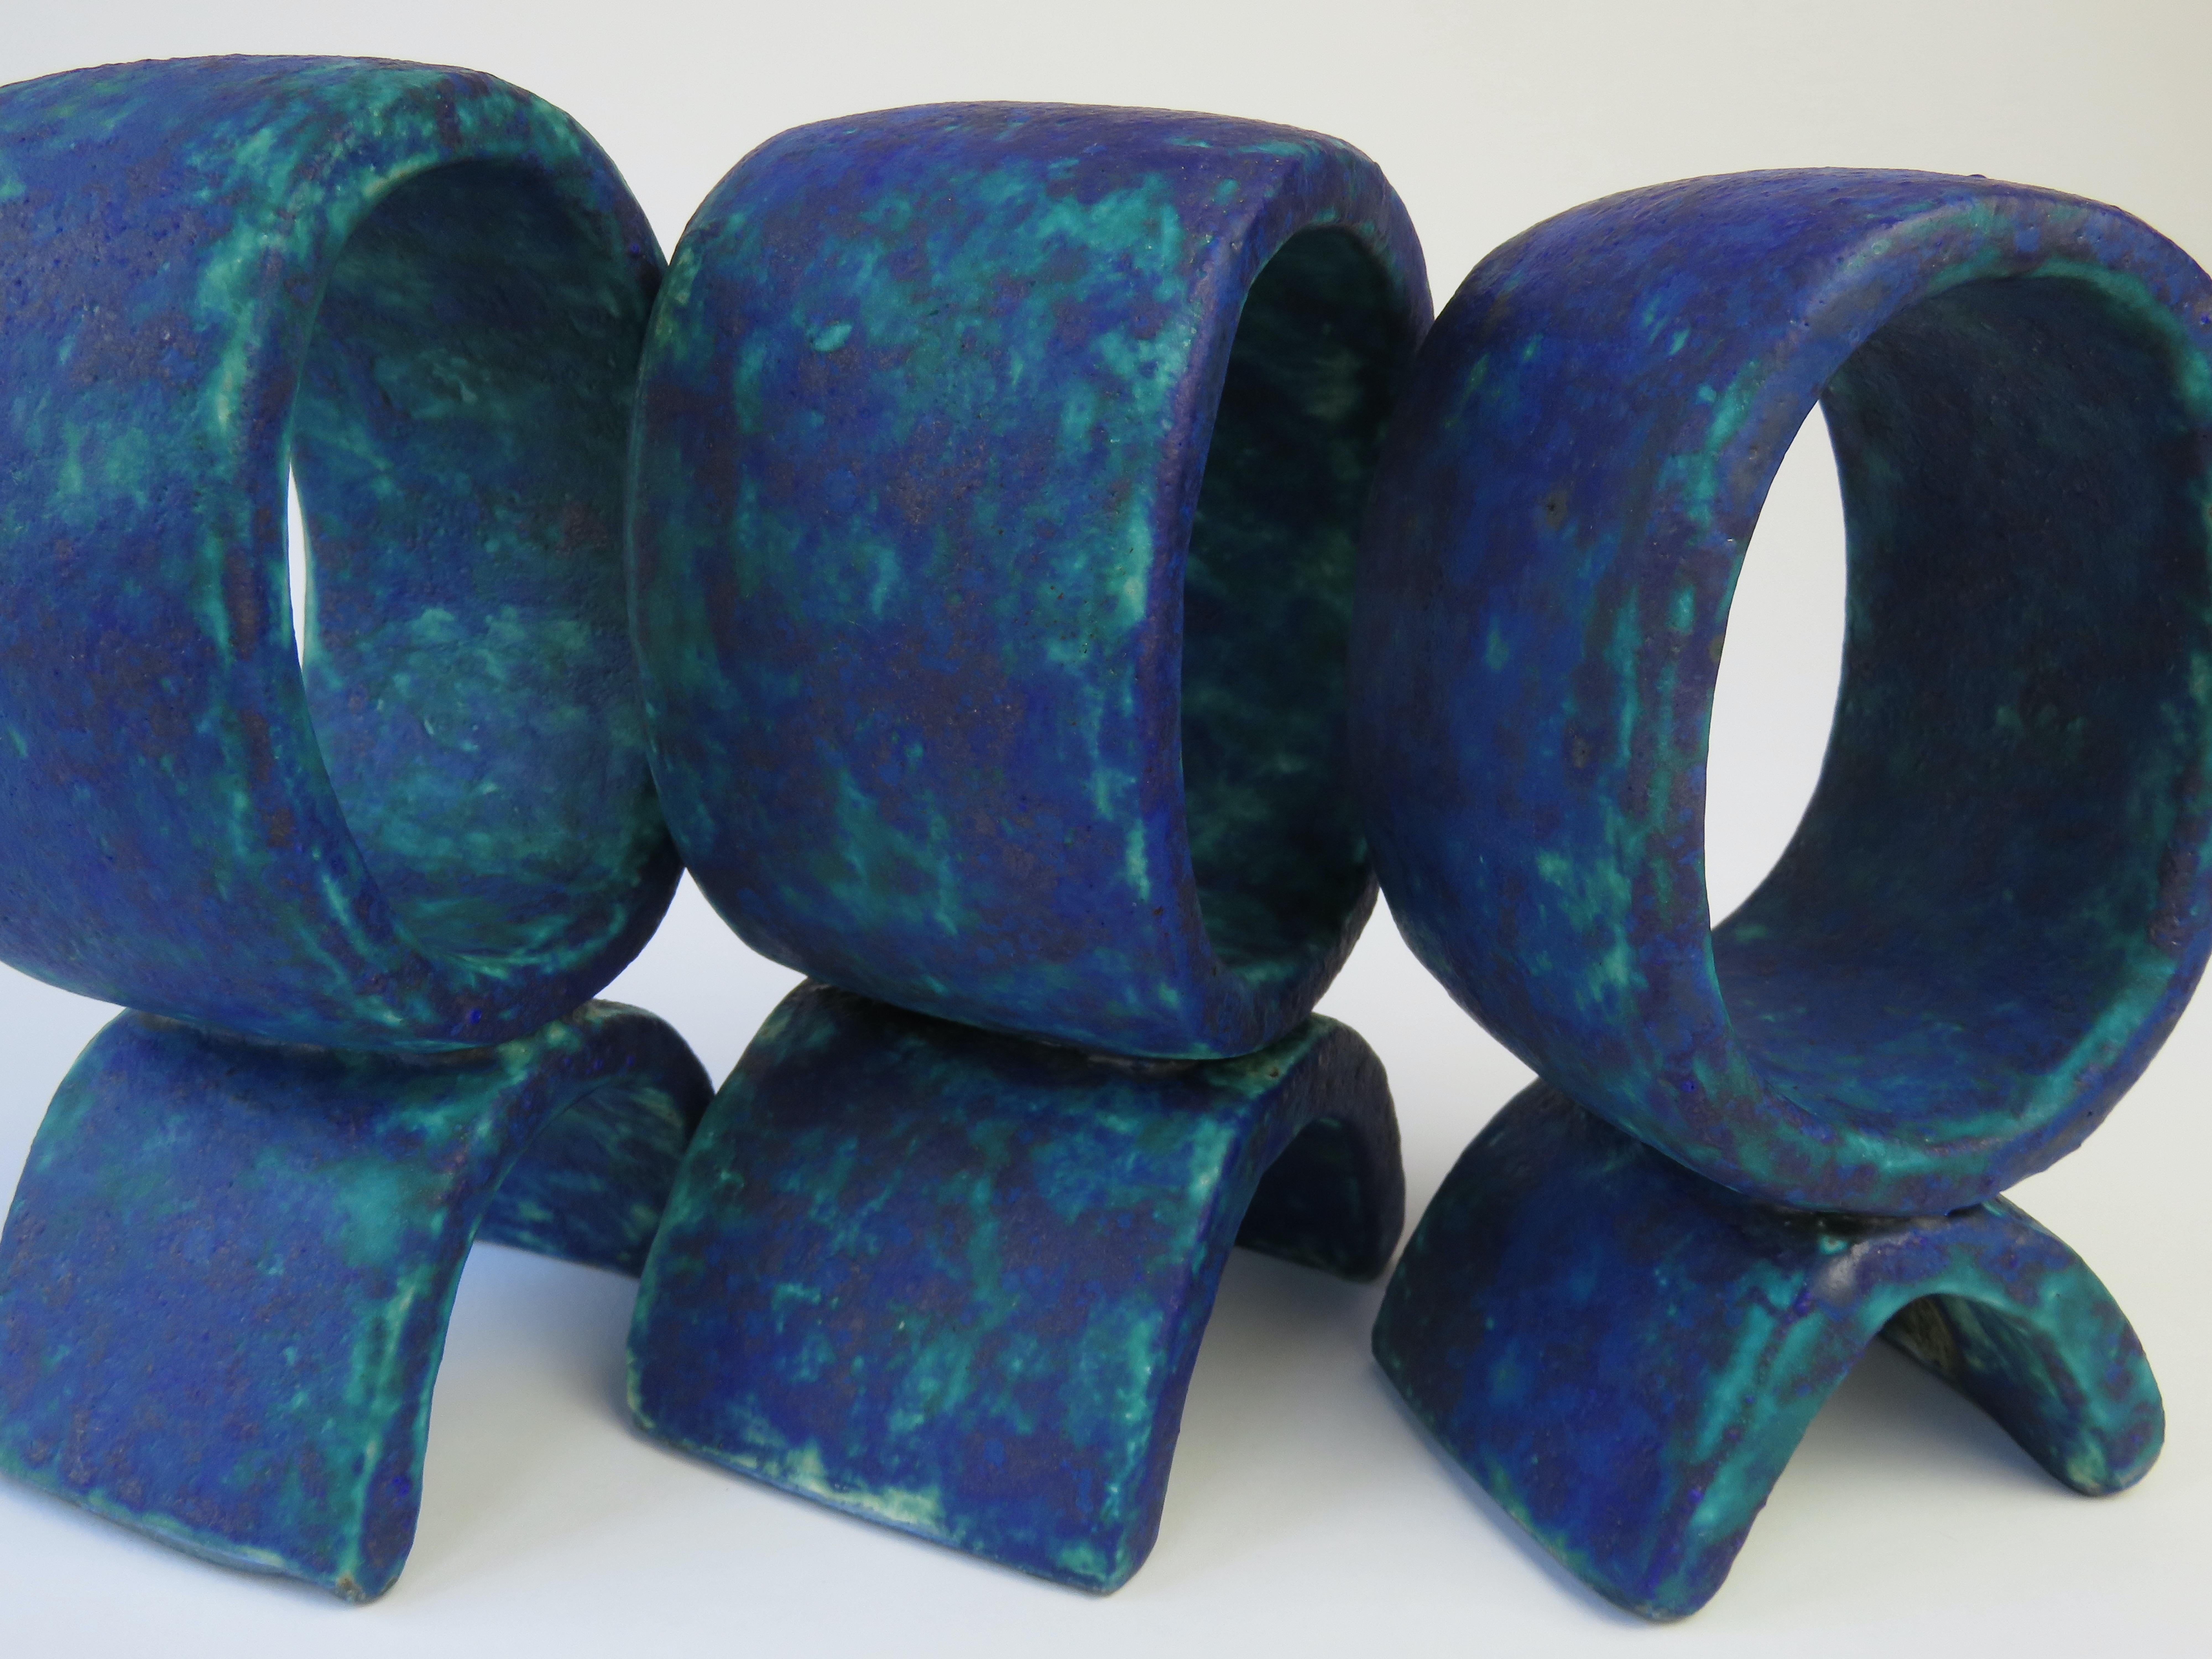 Mottled Turquoise and Deep Blue, 3 Ceramic Totems, Single Rings on Curved Legs For Sale 10